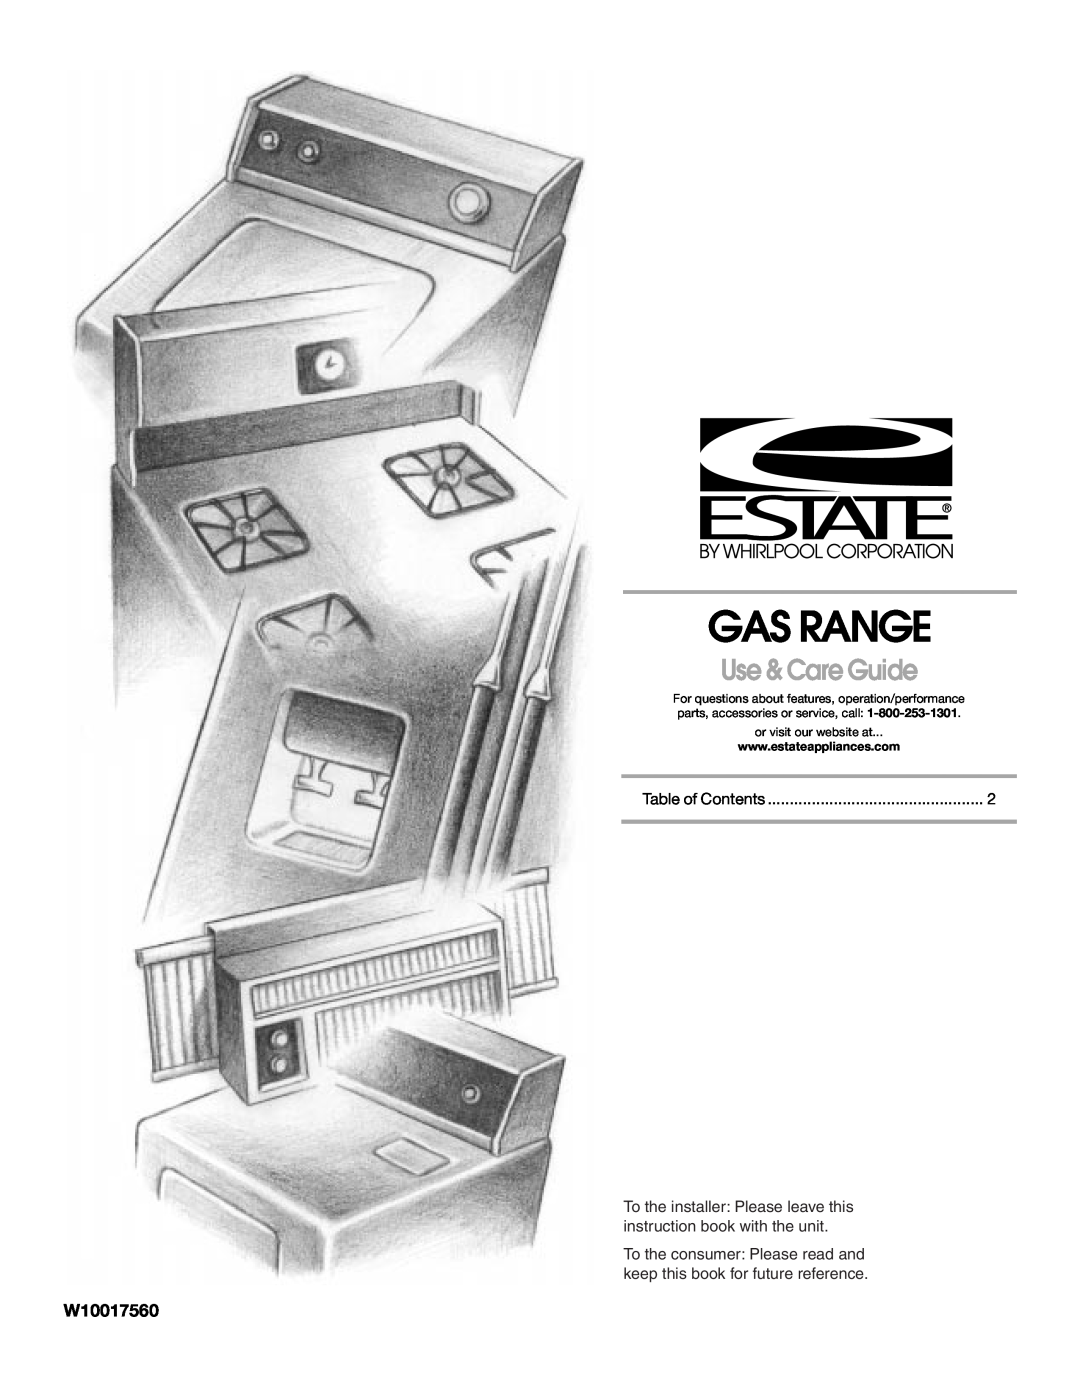 Estate W10017560 manual Gas Range, Use & Care Guide, To the installer Please leave this instruction book with the unit 